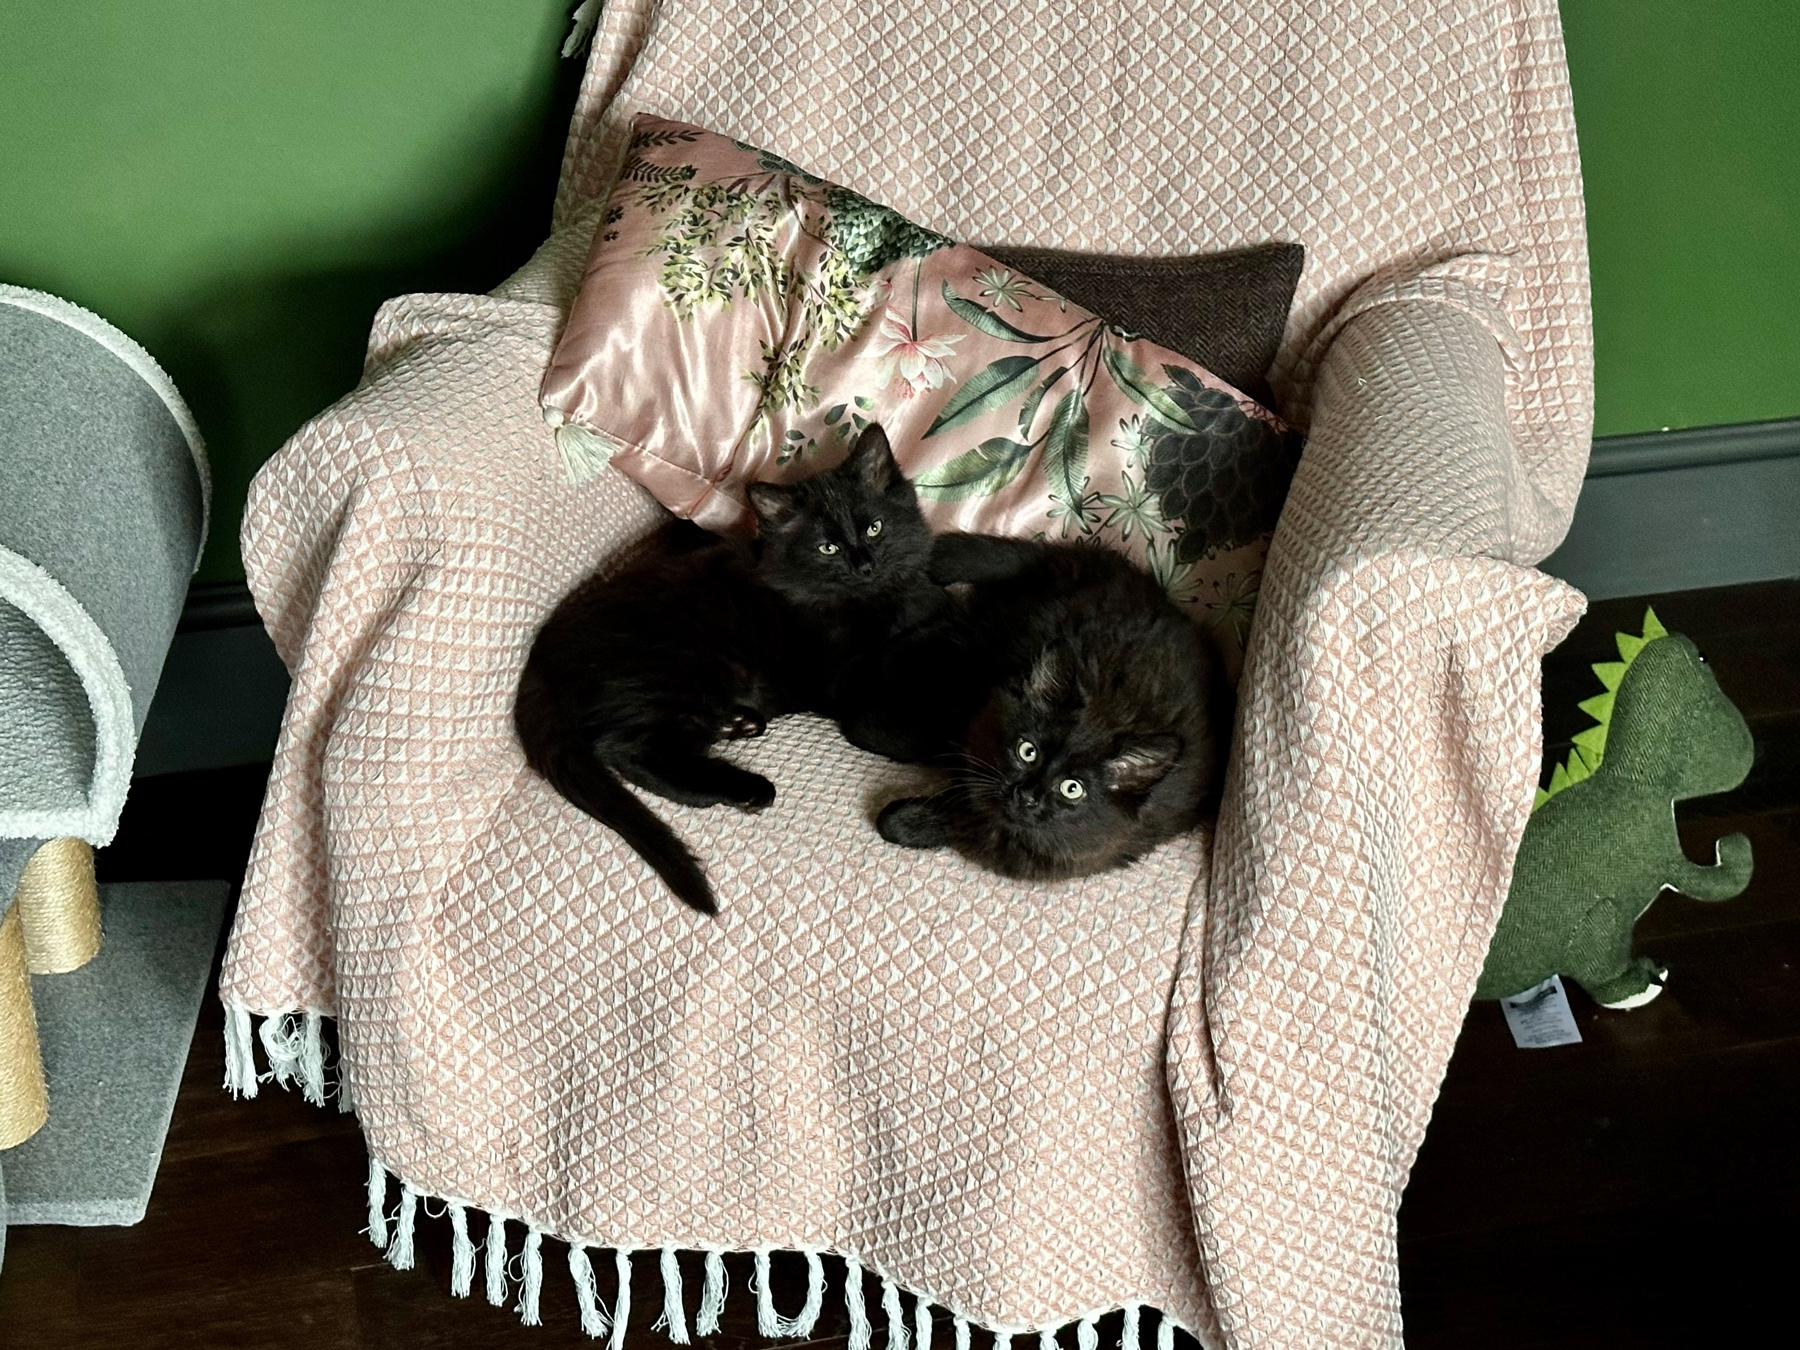 Two little black cats curled up together on a blanket-covered armchair. They're looking at the camera